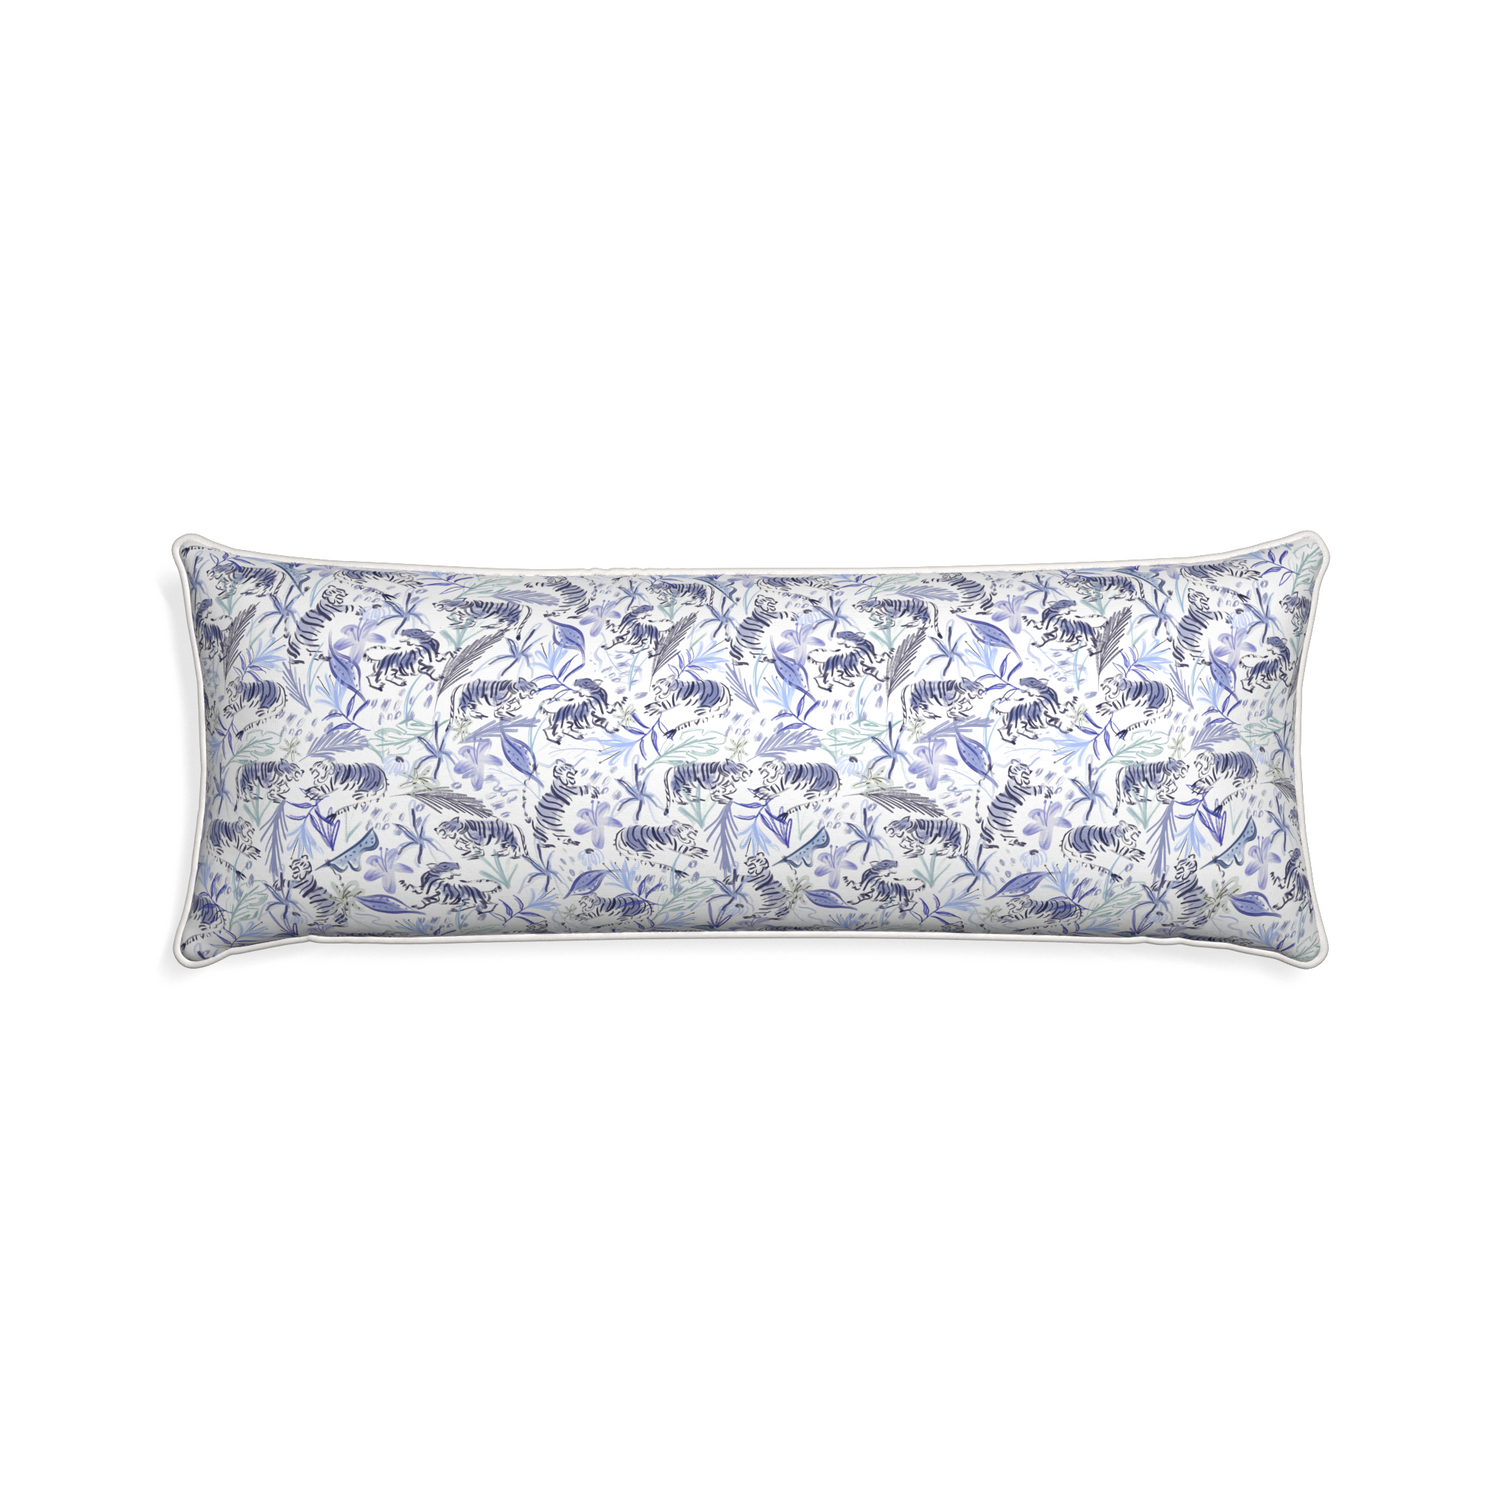 Xl-lumbar frida blue custom blue with intricate tiger designpillow with snow piping on white background